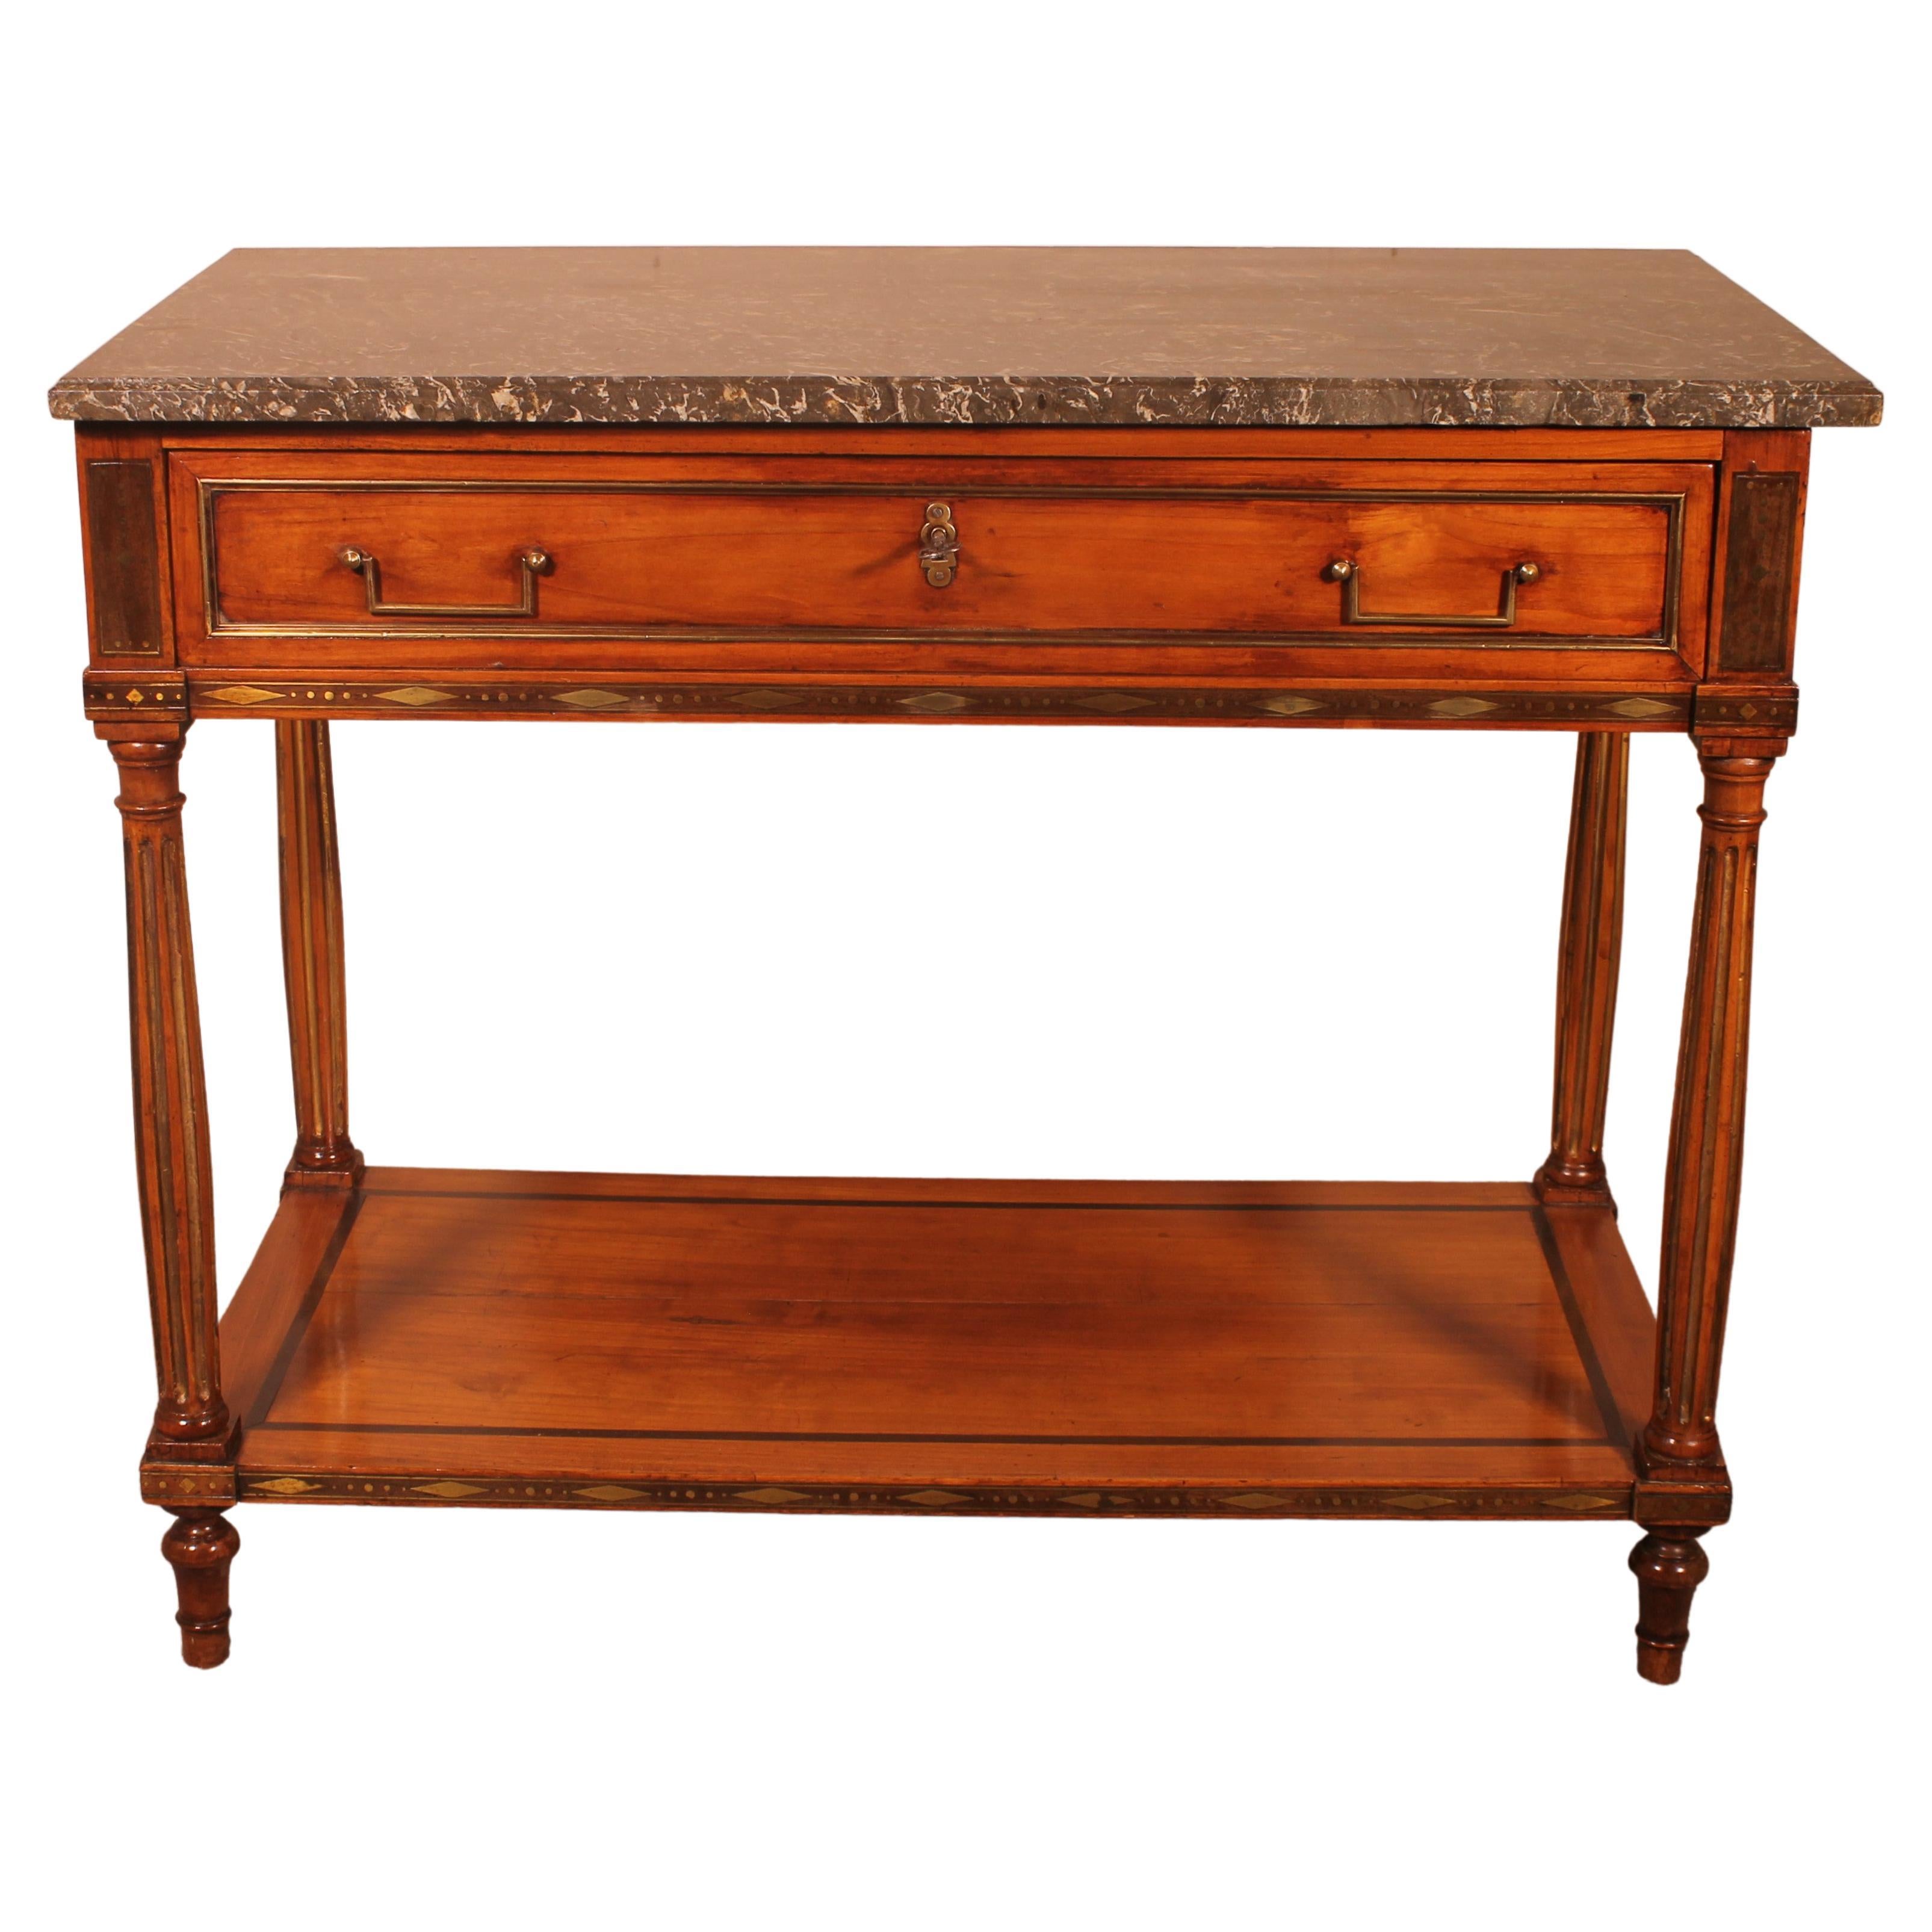 Louis XVI Console in Cherry Wood, 18th Century Stamped Lm Pluvinet